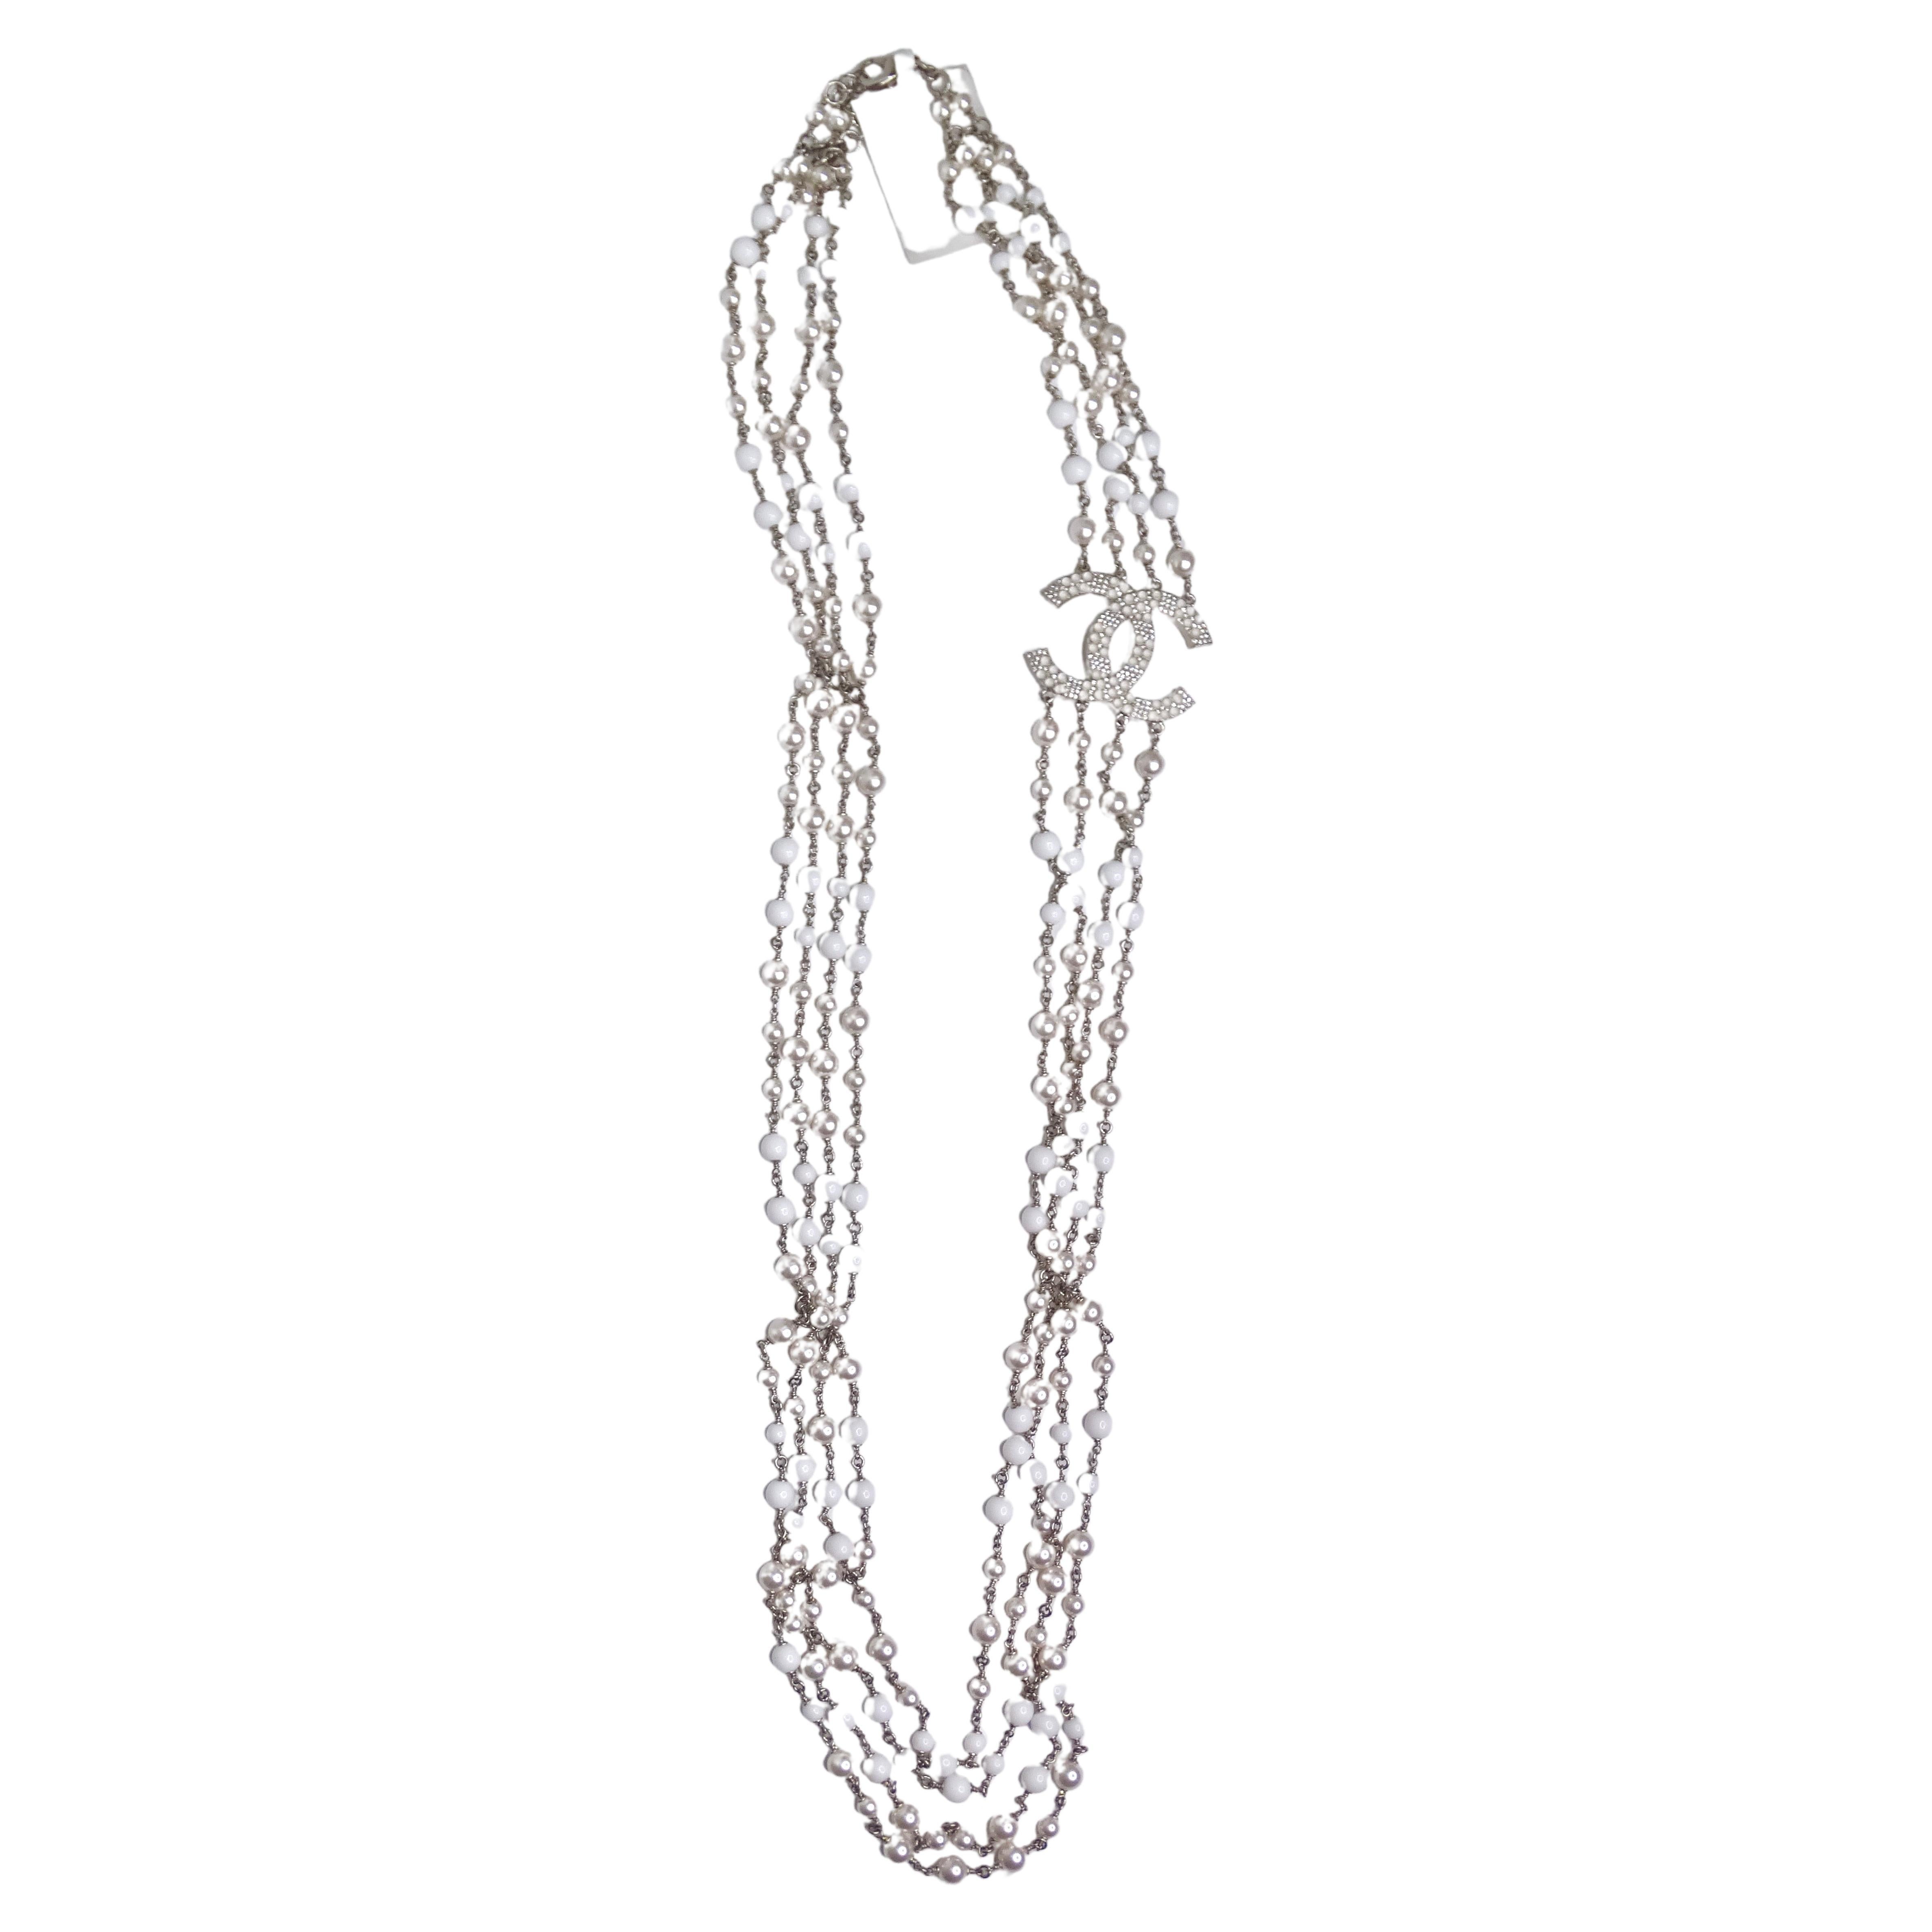 Introducing your new evening wear necklace! This is an iconic Chanel piece you need in your collection. It features silver hardware, white and silver beads, four very long strands, and a large 'CC' pendant measuring 2in x 1.5in. Pair this with your